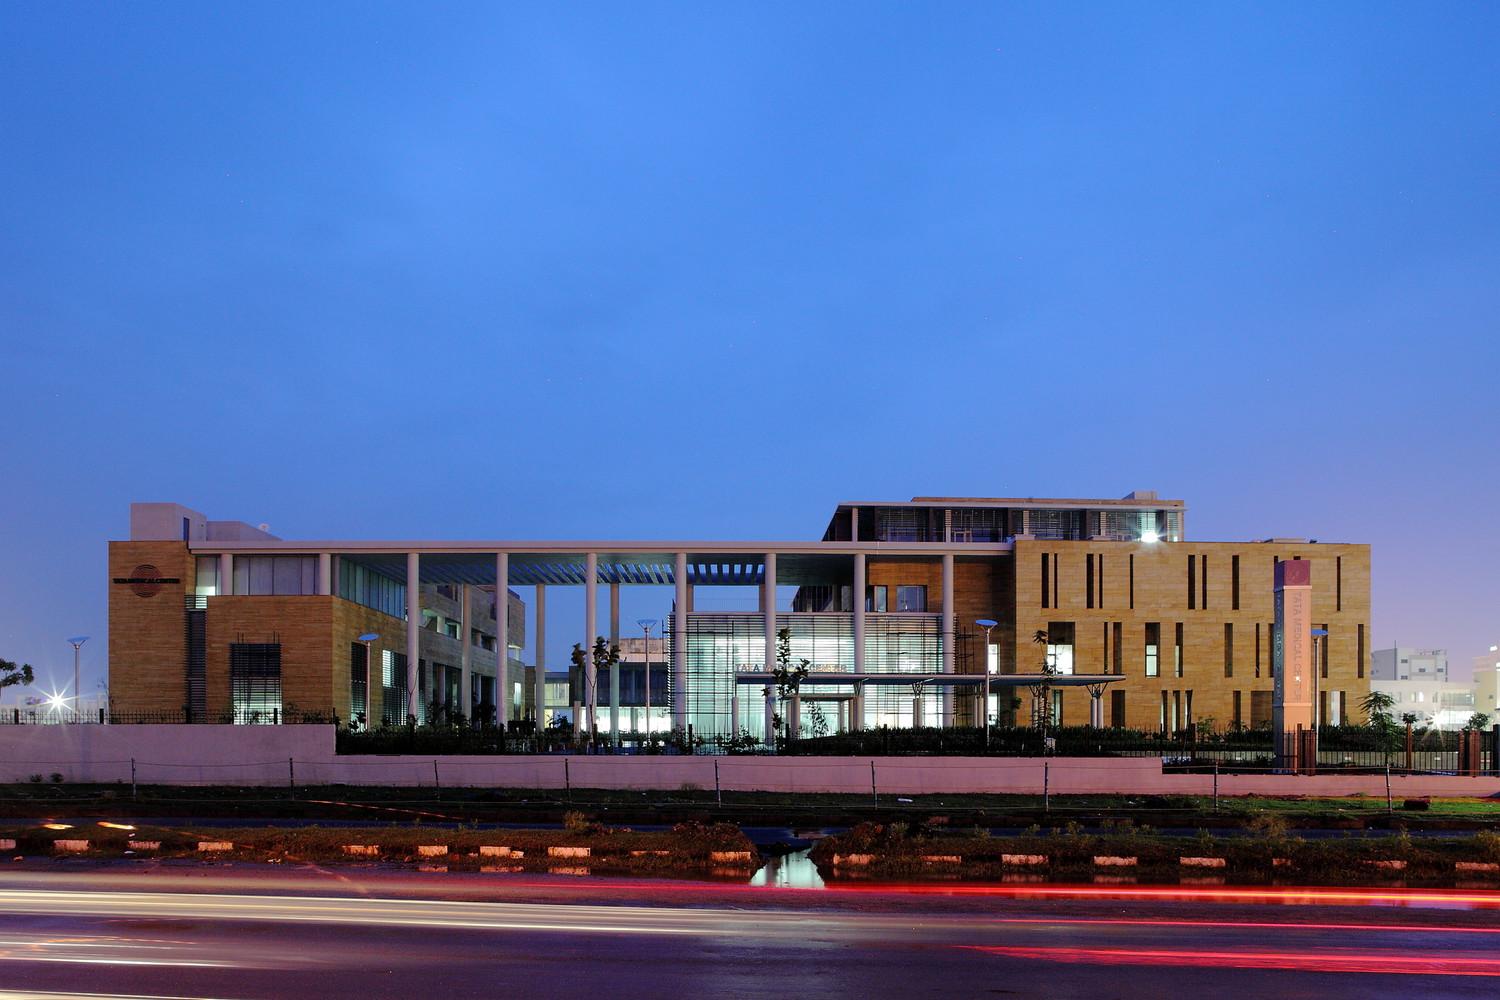 The Tata Medical Center has become a new civic landmark for the city of Kolkata